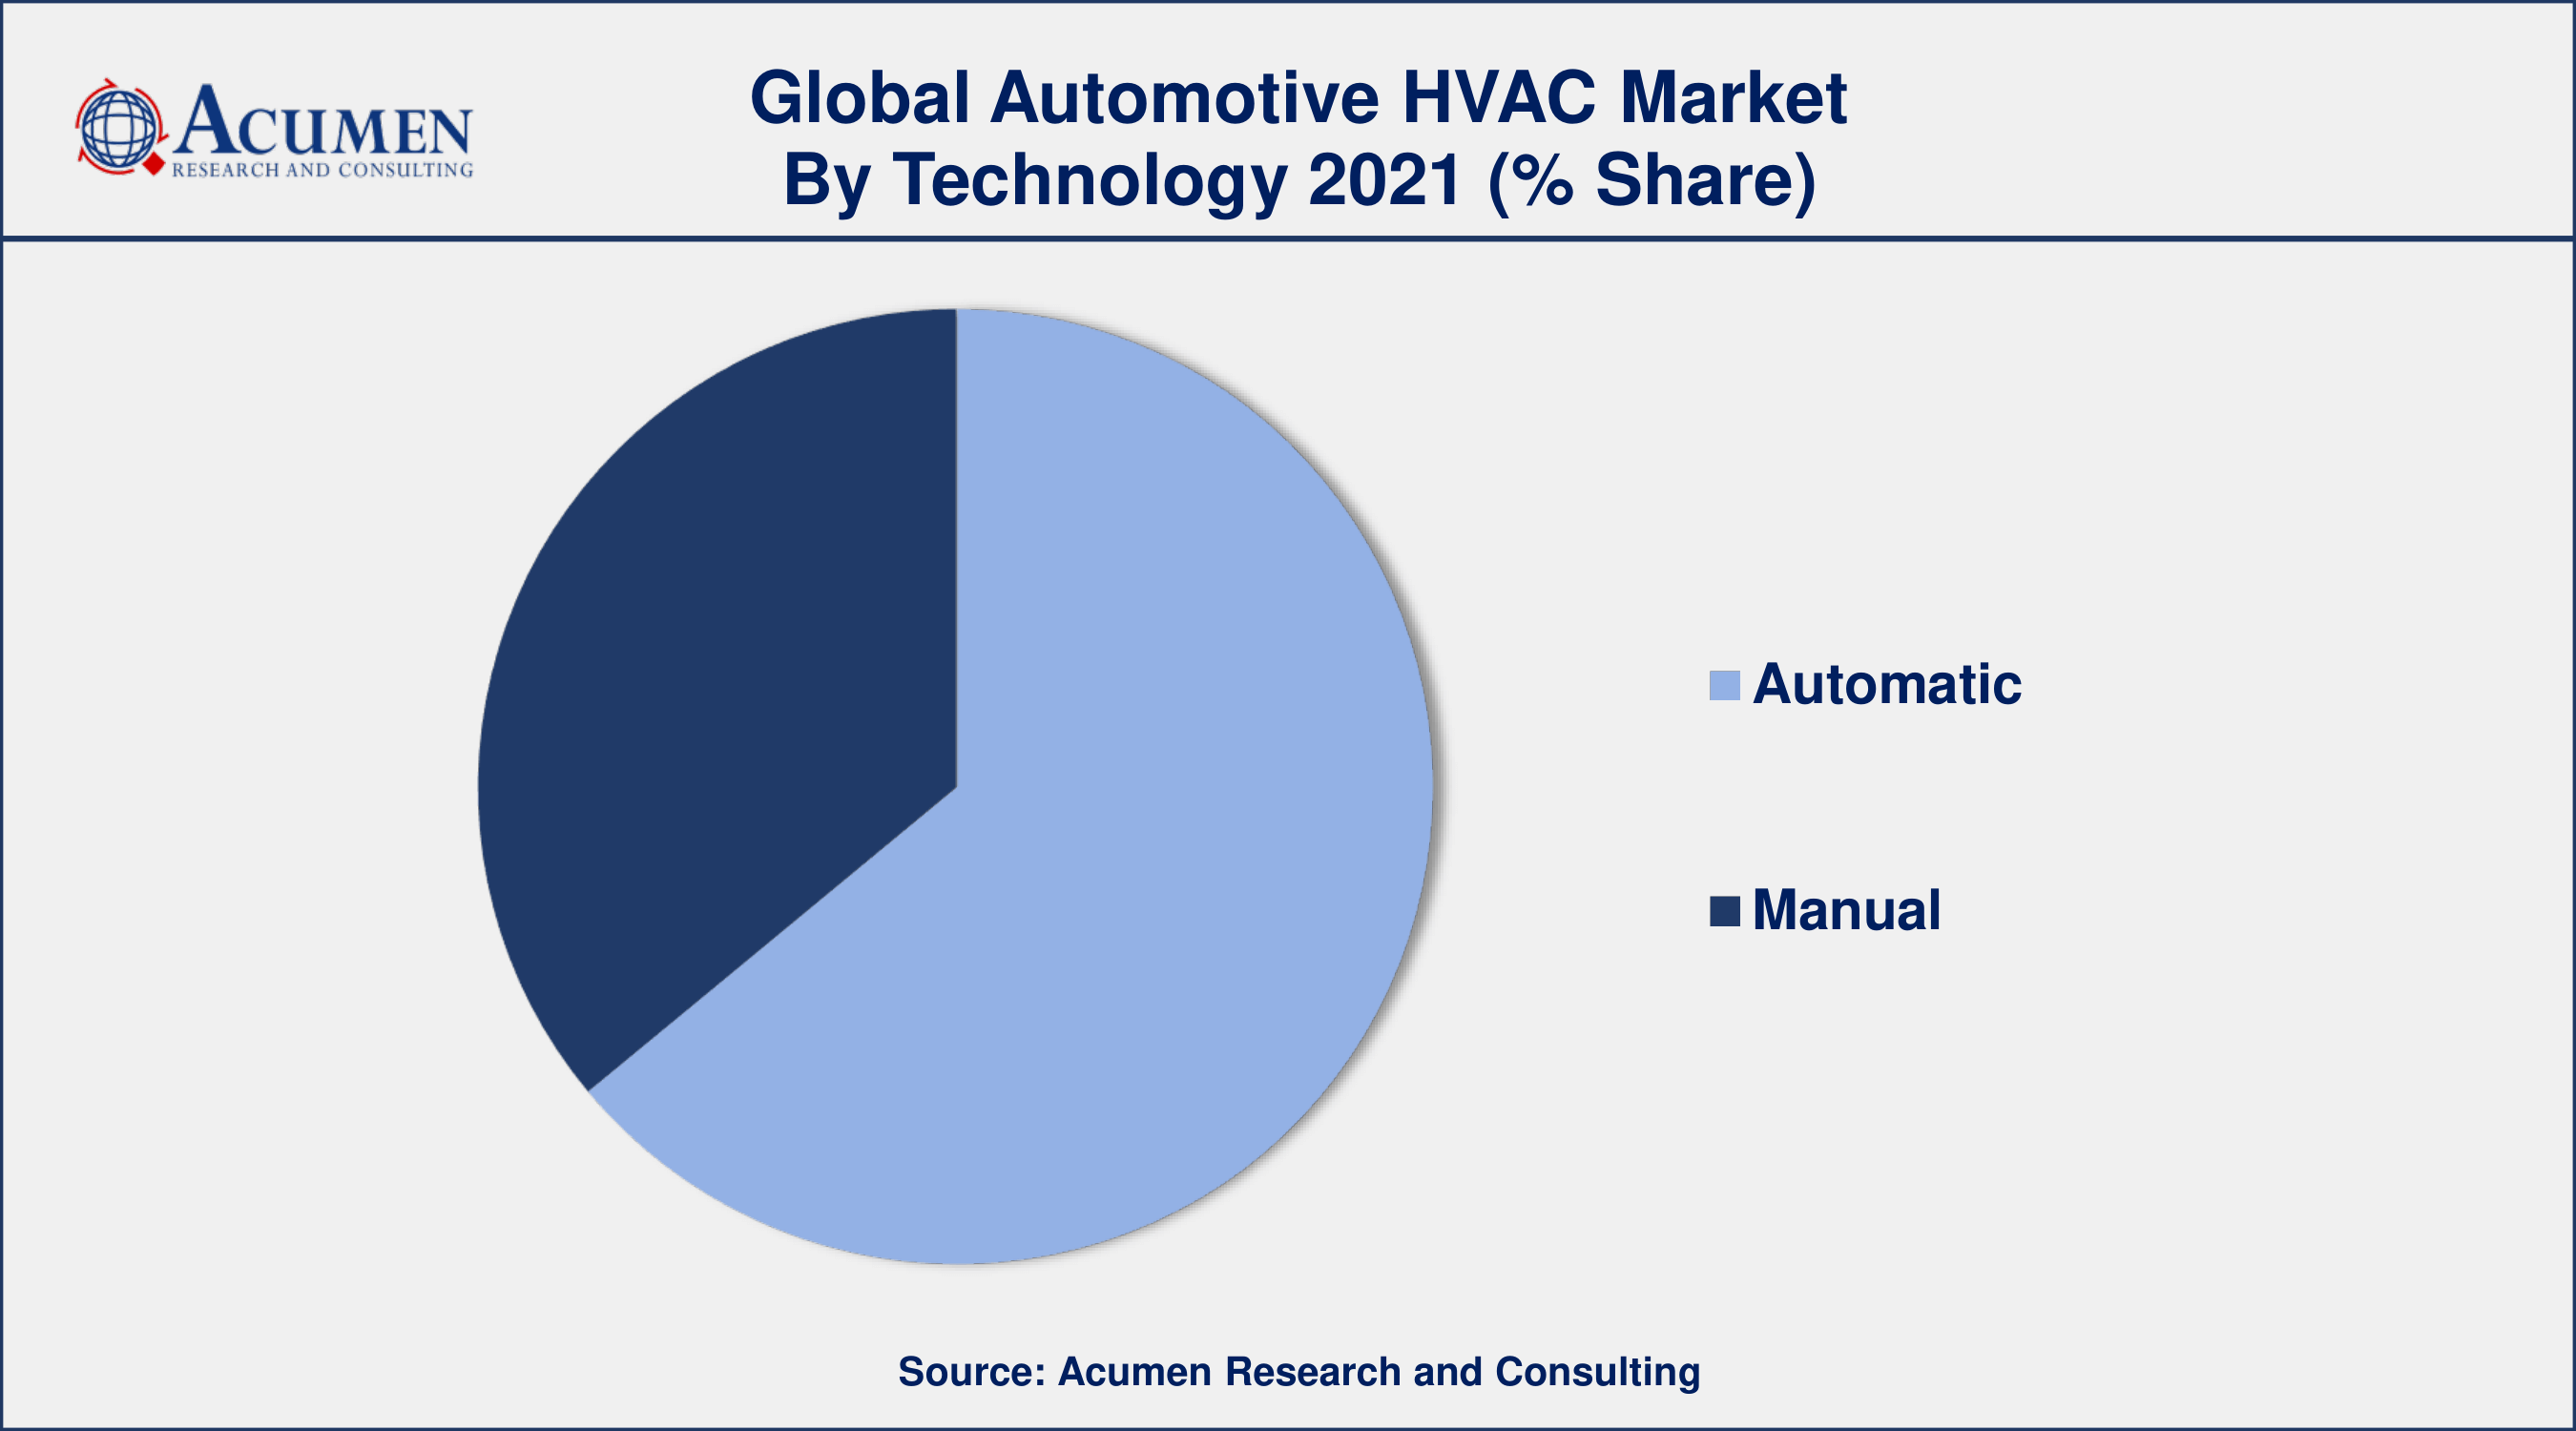 Among technology, automatic category engaged more than 64.2% of the total market share